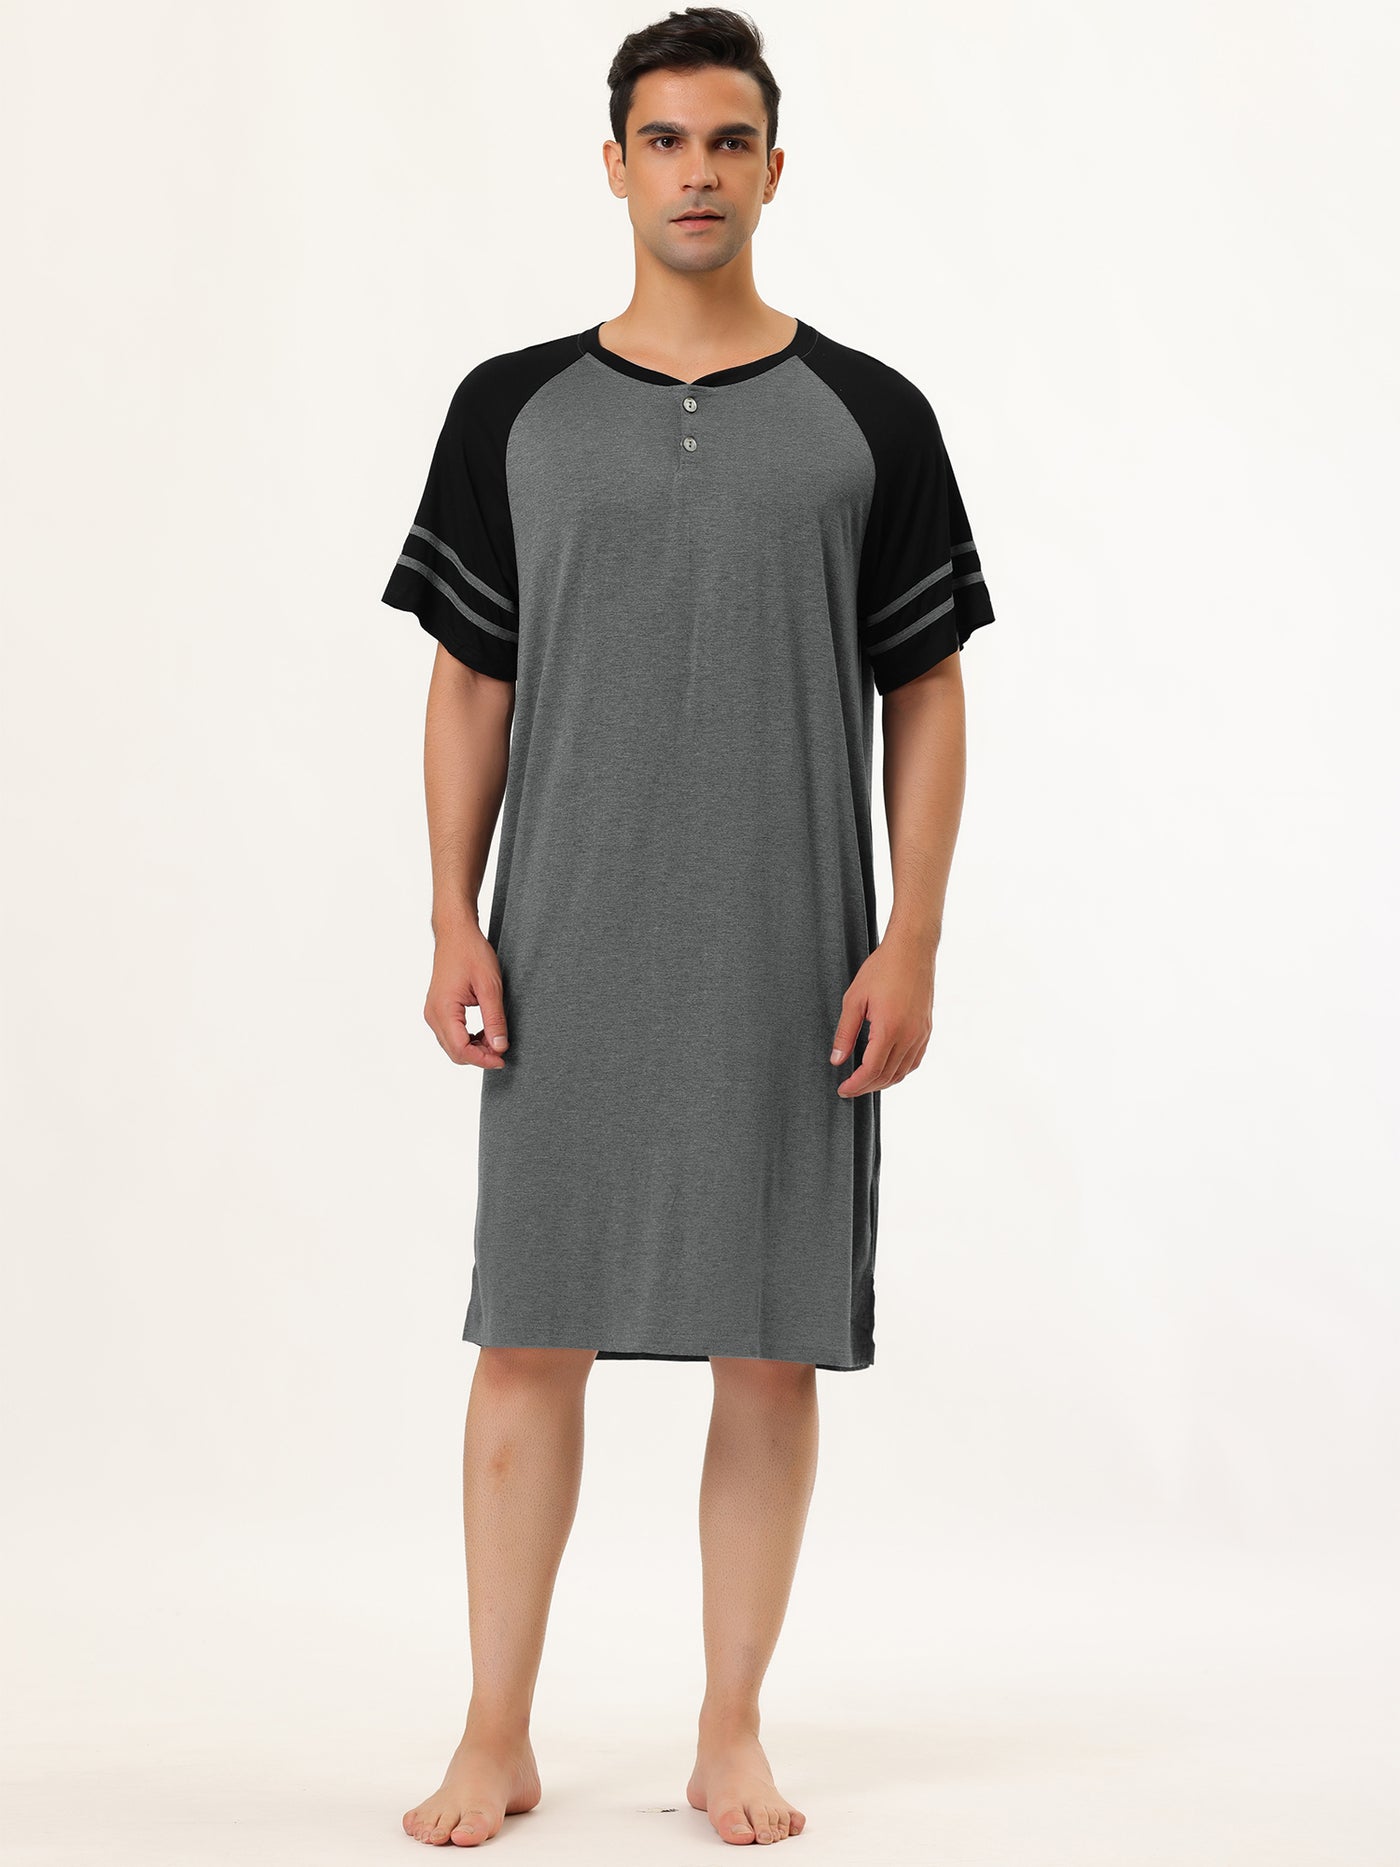 Bublédon Crew Neck Contrast Color Lounge Nightdress For Men